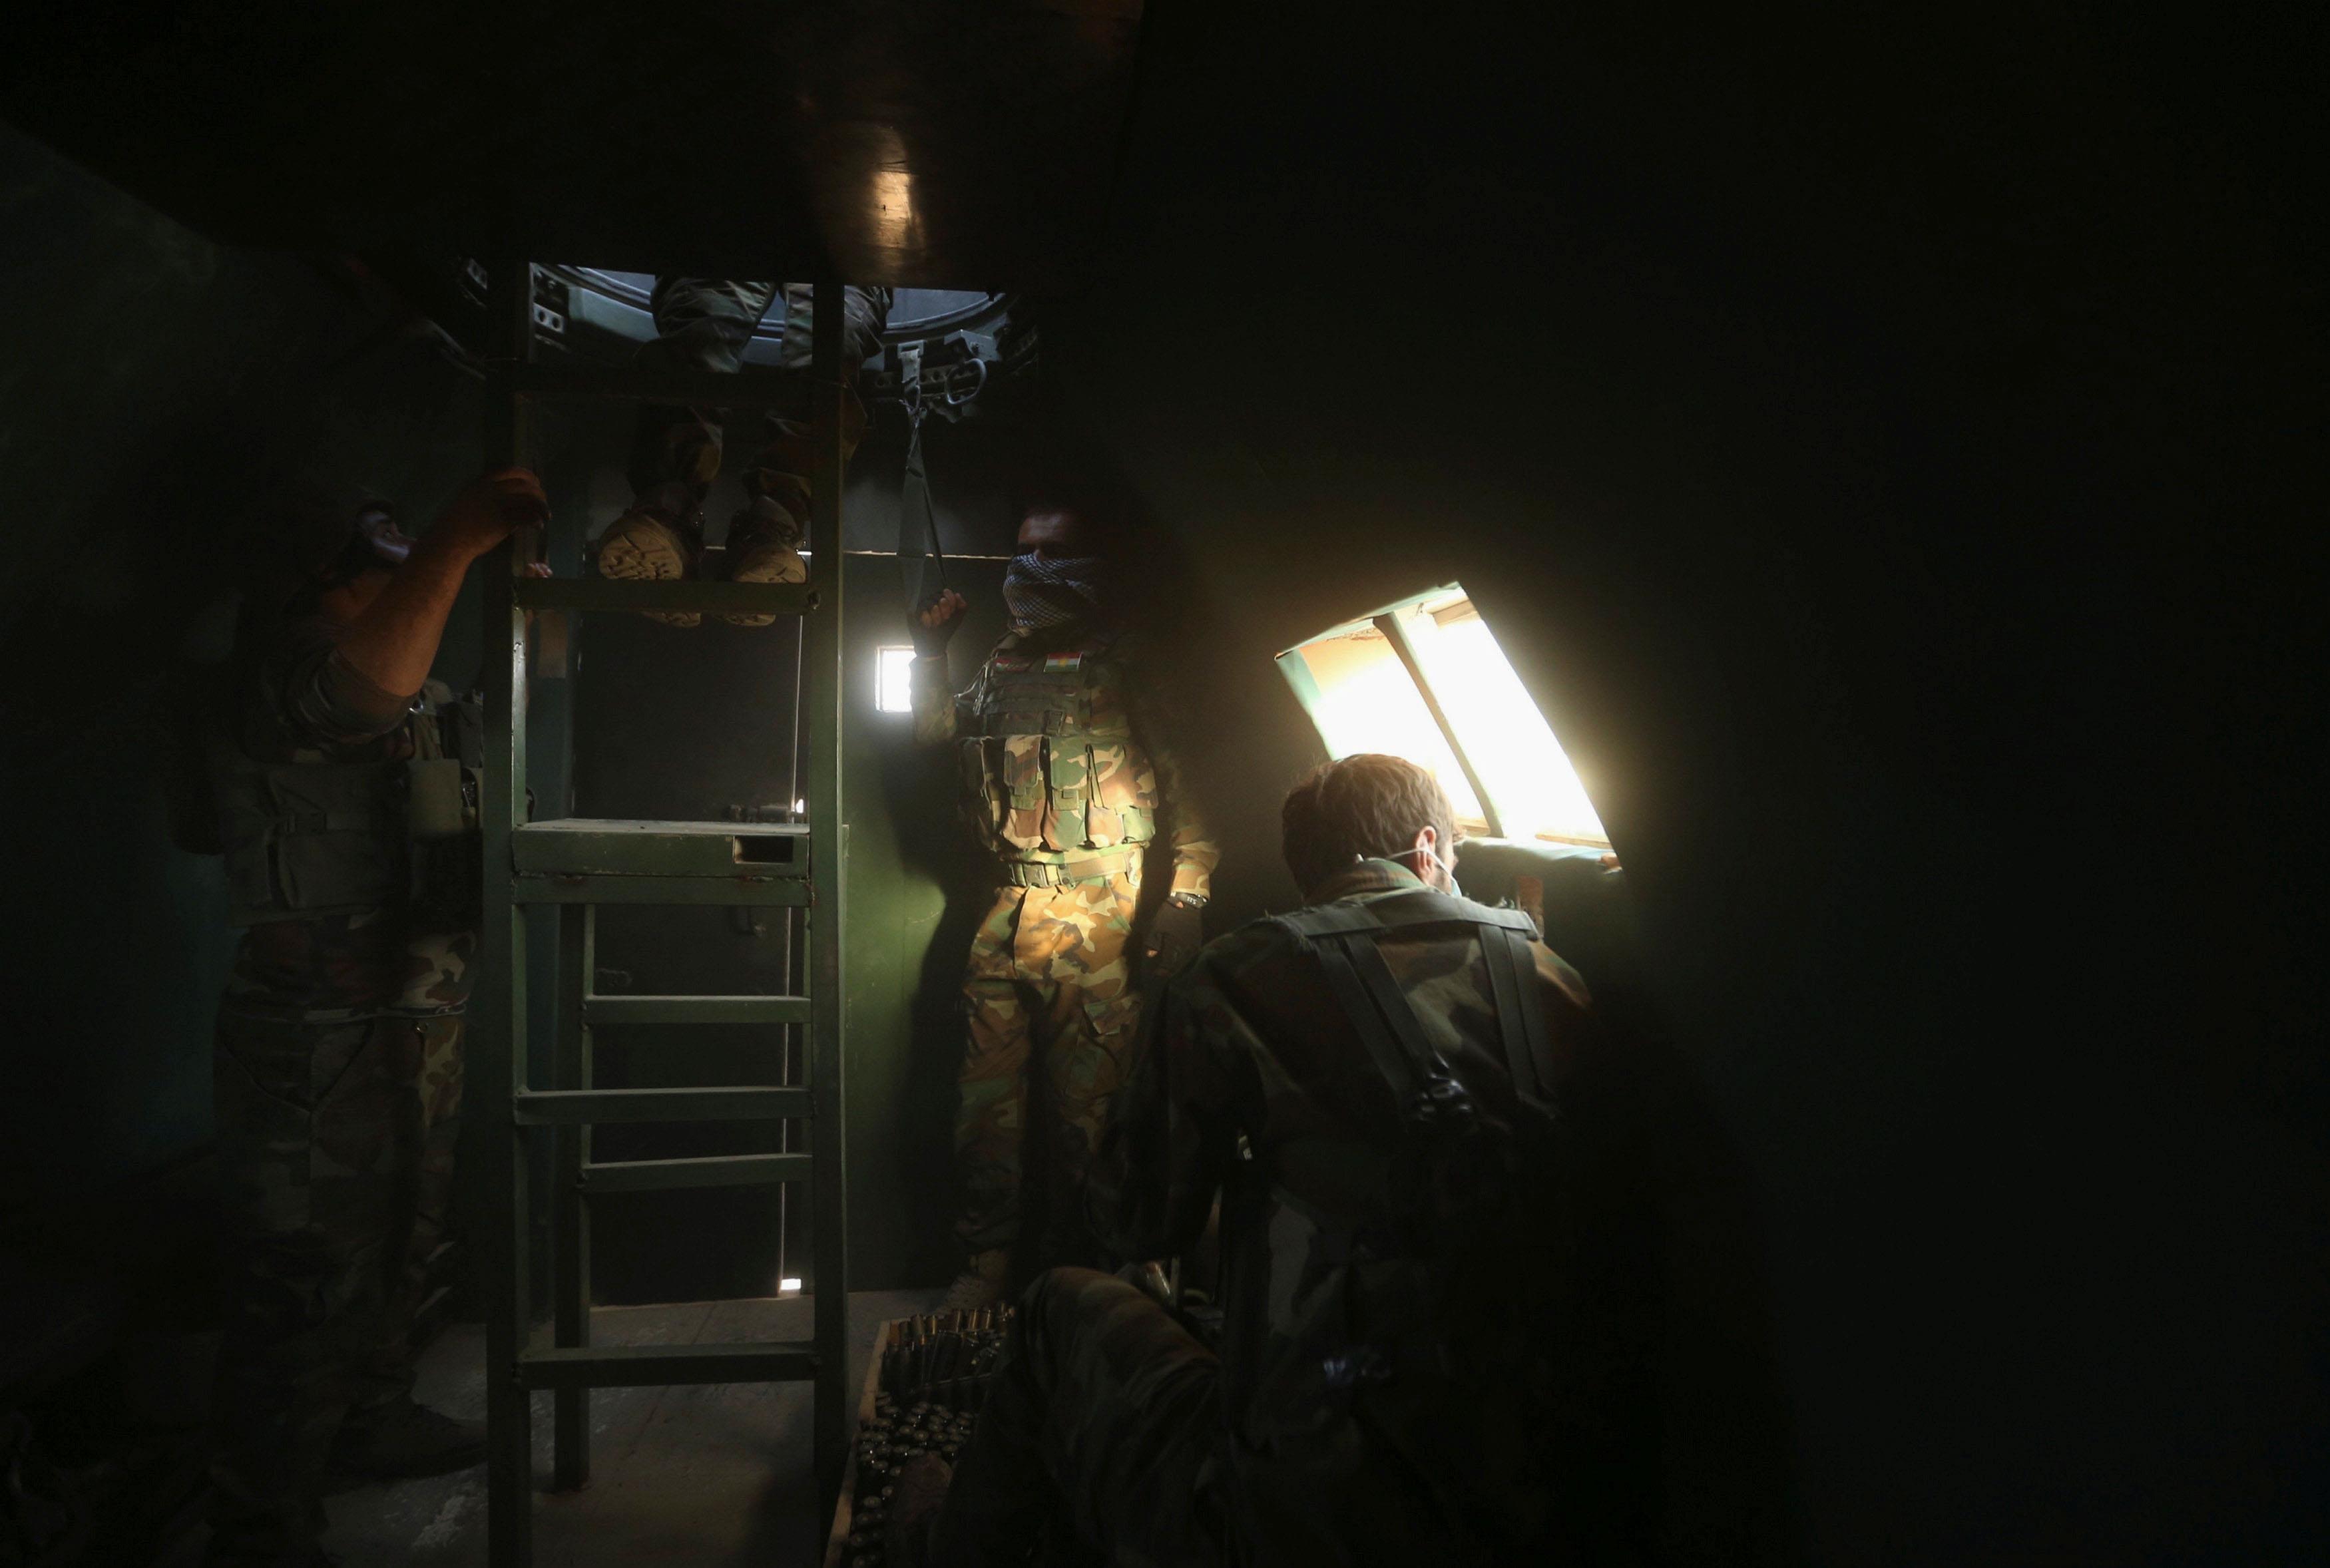 Members of the Peshmerga forces are seen inside a military vehicle north of Mosul, during an operati